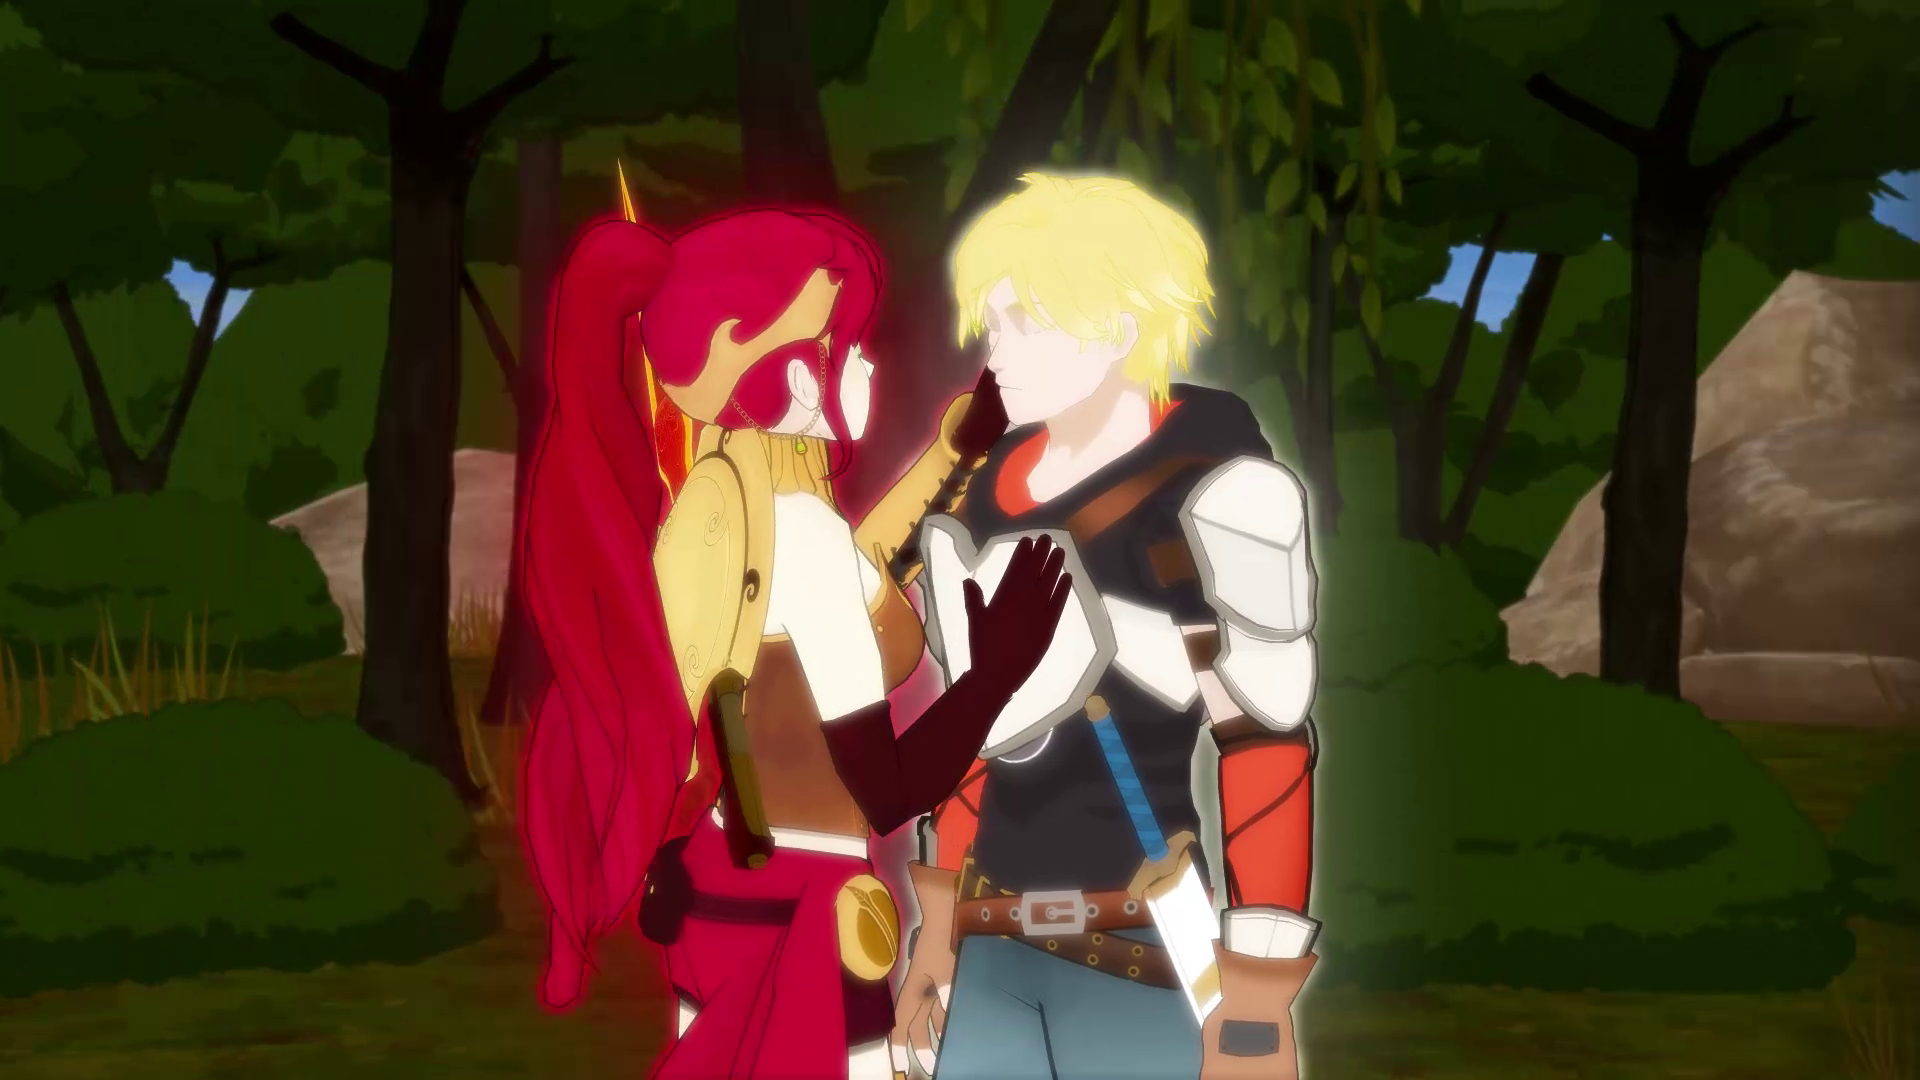 https://img3.wikia.nocookie.net/__cb20131209122103/rwby/images/1/16/1106_The_Emerald_Forest_11233.png